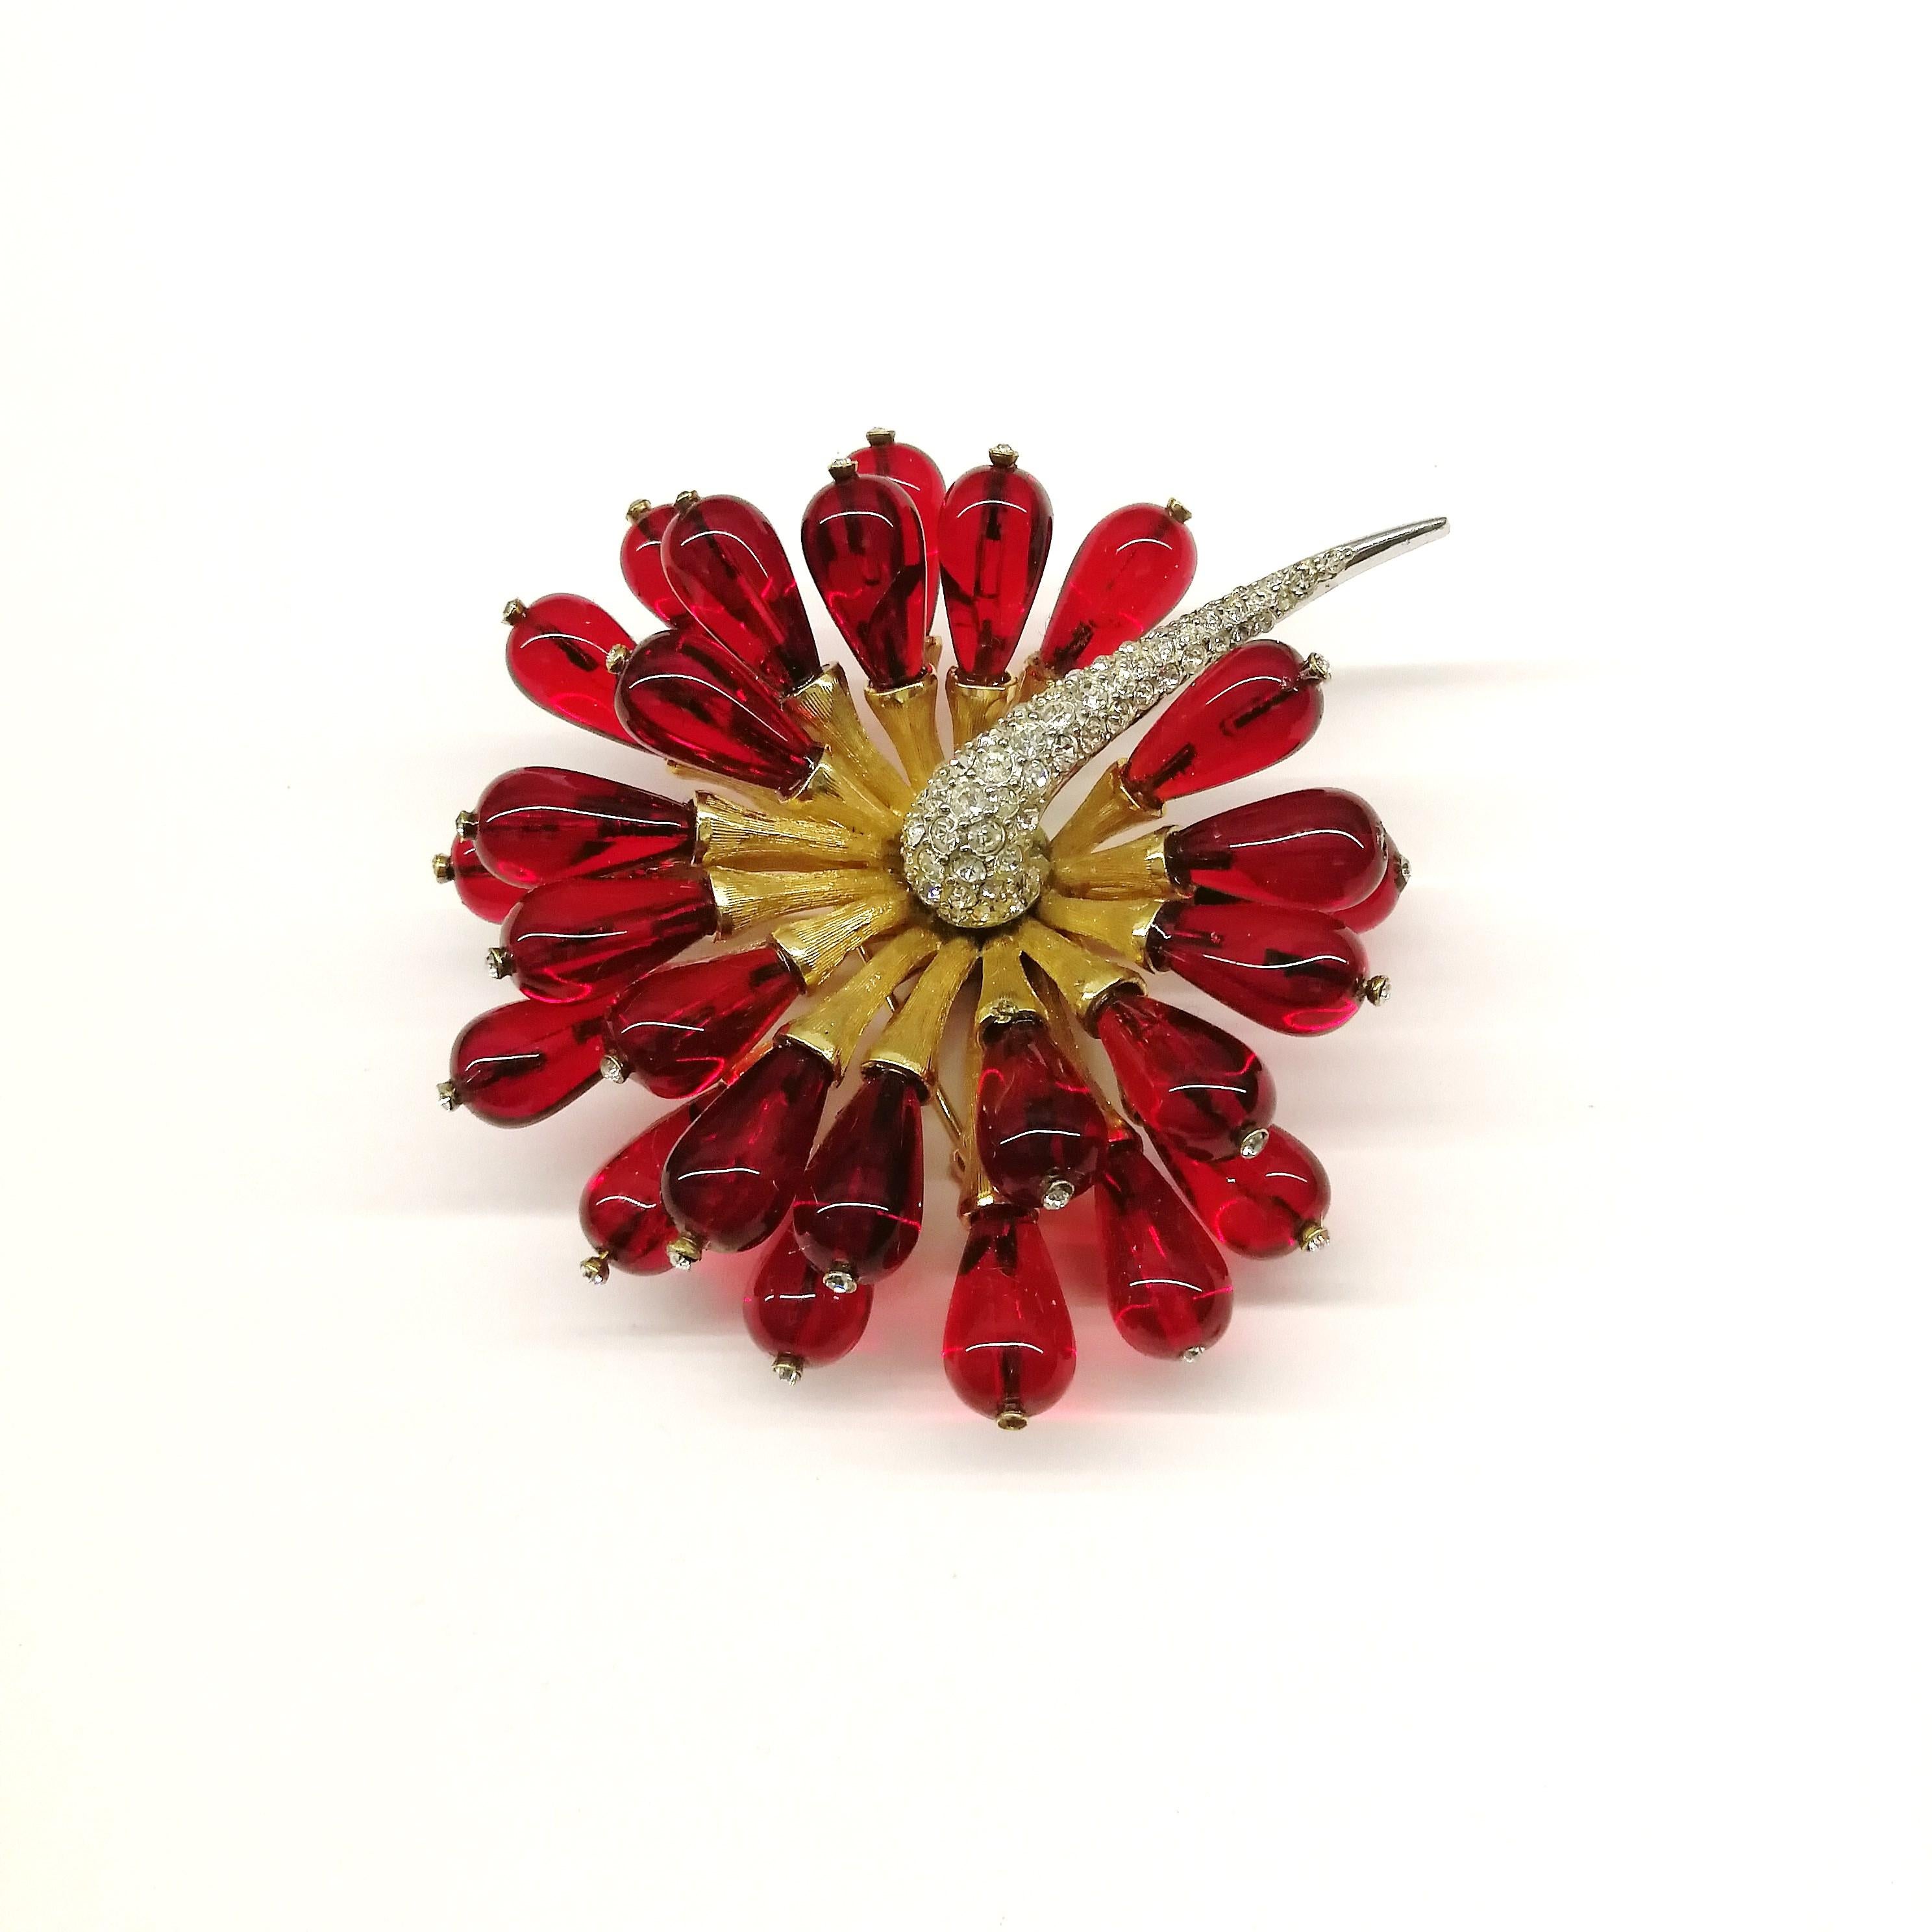 A highly dynamic and very striking brooch and earrings from Marcel Boucher, in the most perfect colour, deep ruby red, each 'petal' tipped with a single paste, each in its own setting, and a serpentine paste stem. As with many Boucher designs, there